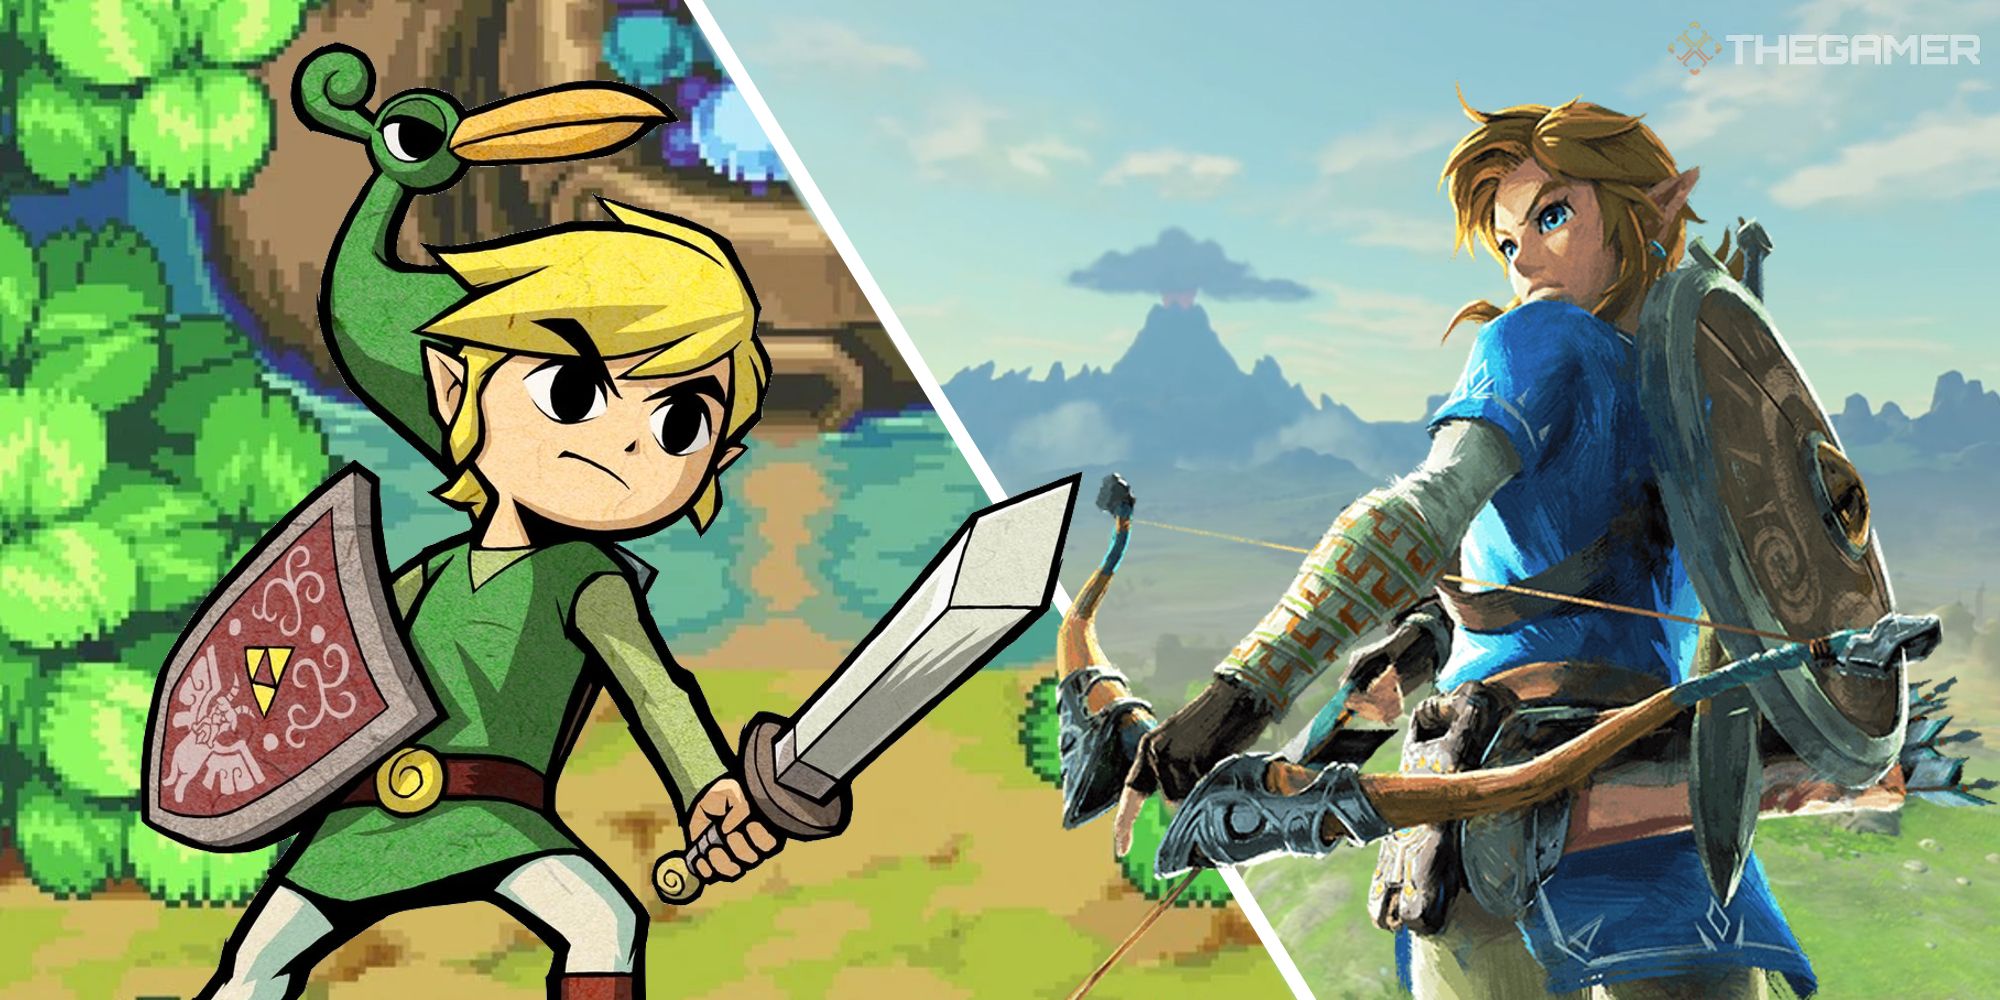 split image showing minish cap and breath of the wild variants of link from the legend of zelda